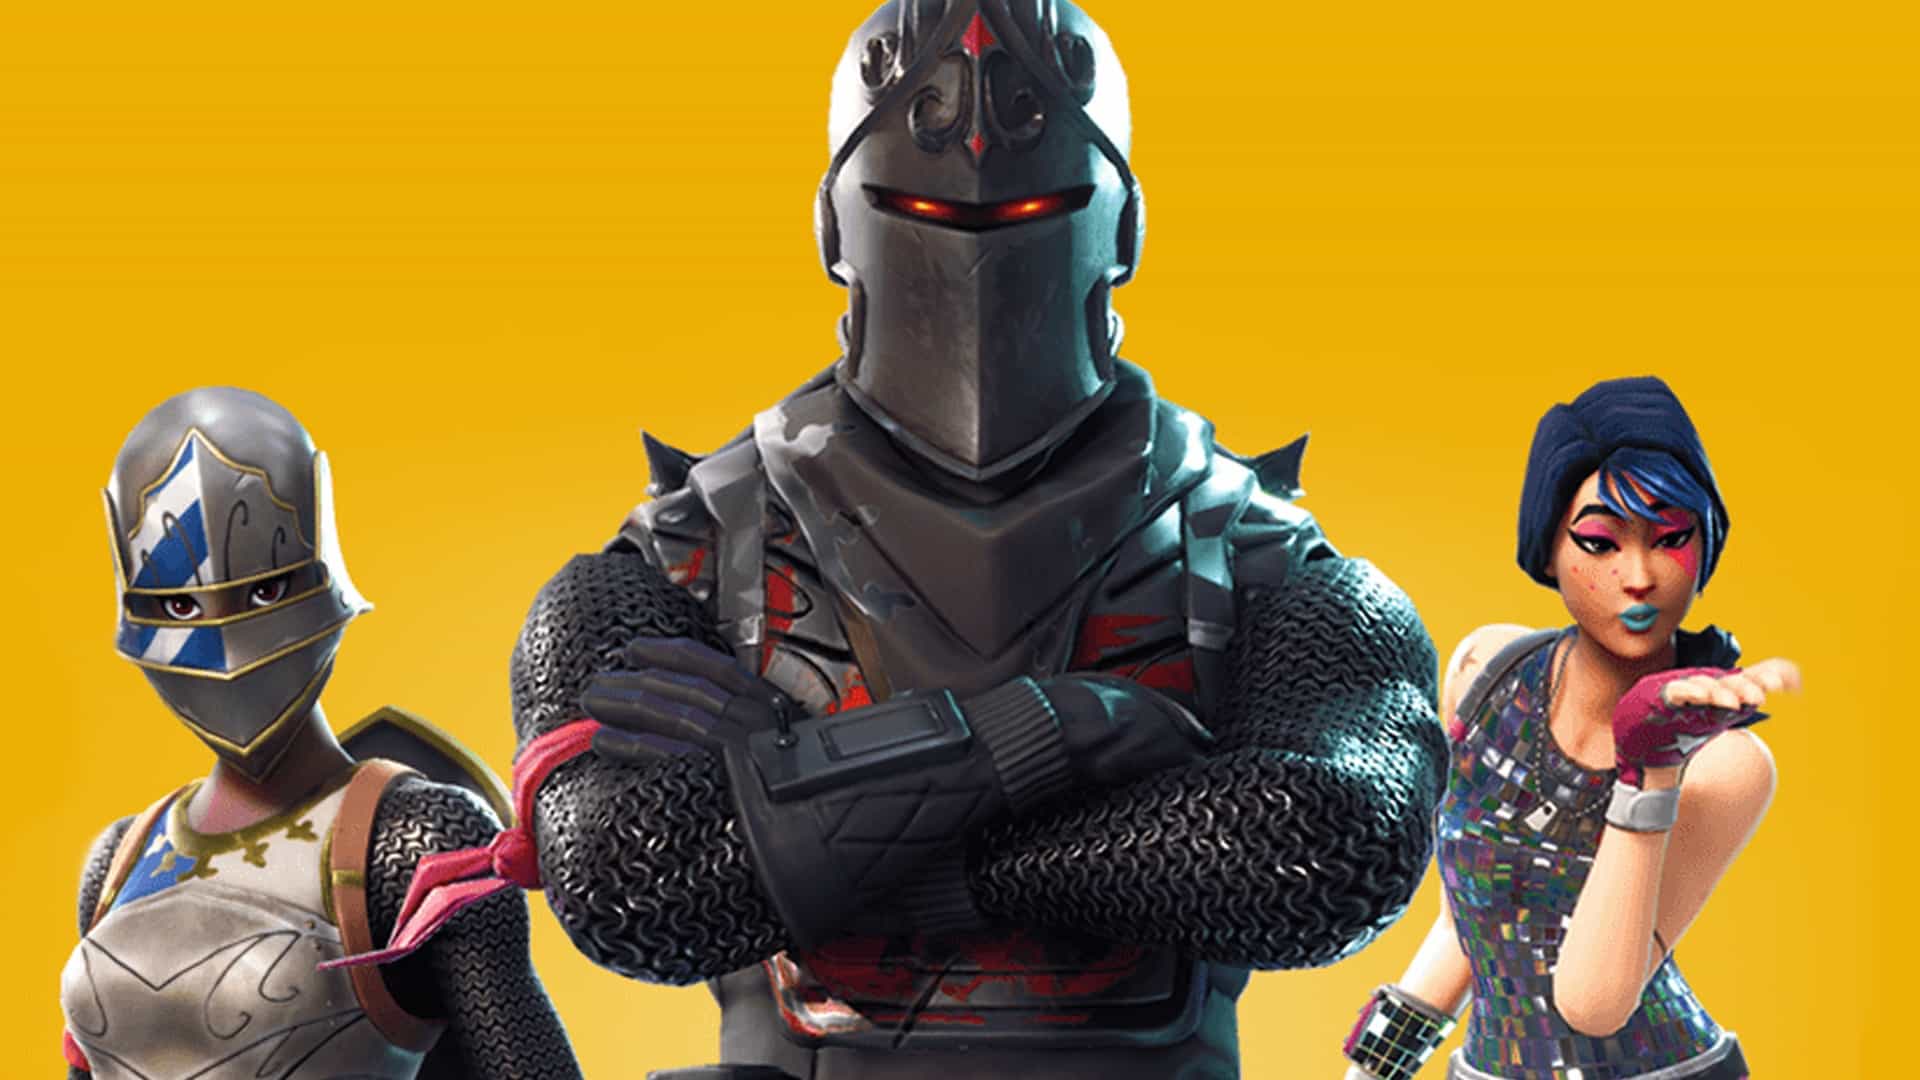 Fortnite Starter Pack Release Date and Contents Confirmed   MP1st